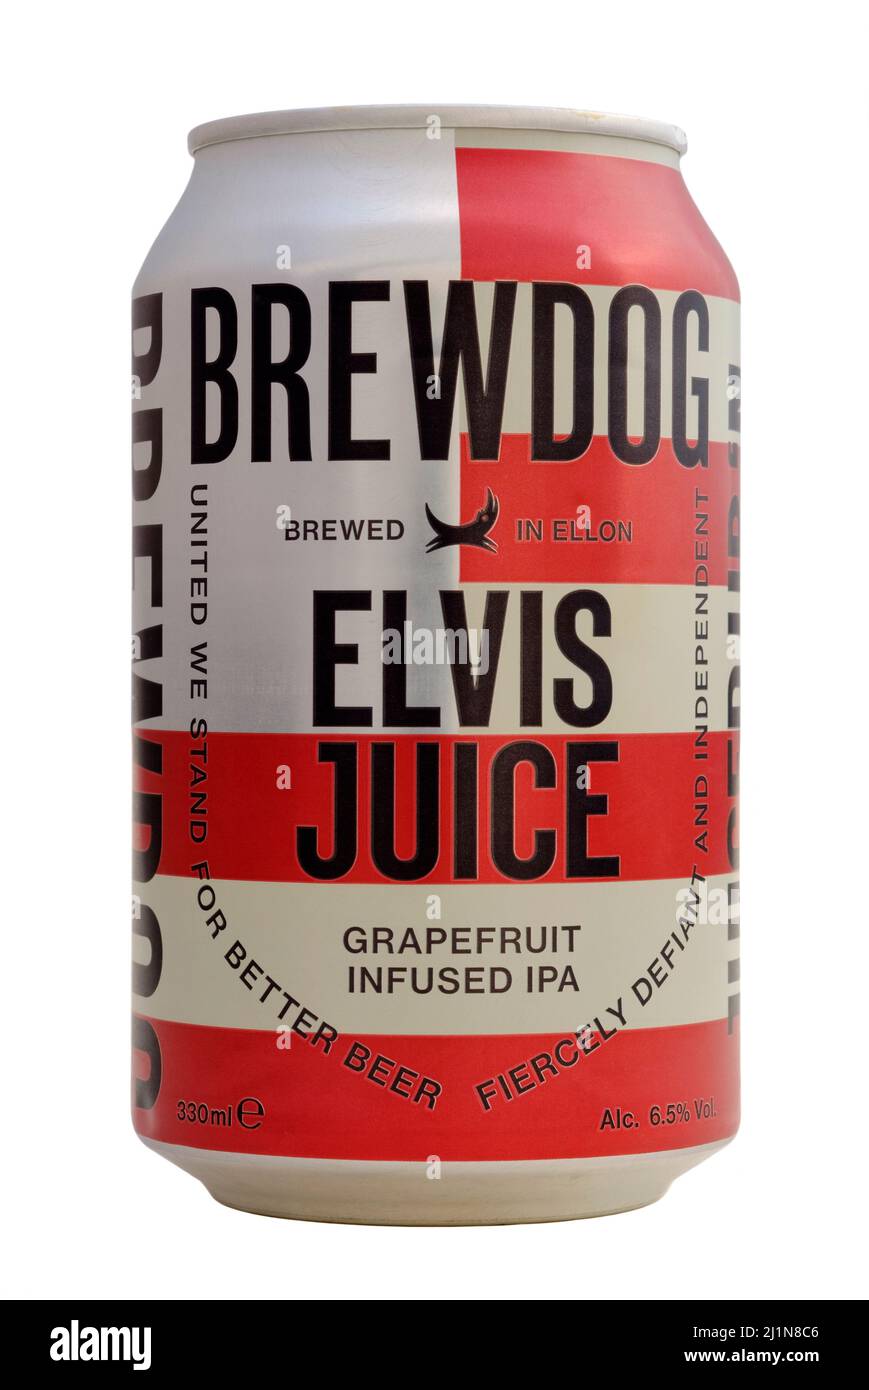 can of brewdog elvis juice grapefruit infused ipa cut out on white background Stock Photo